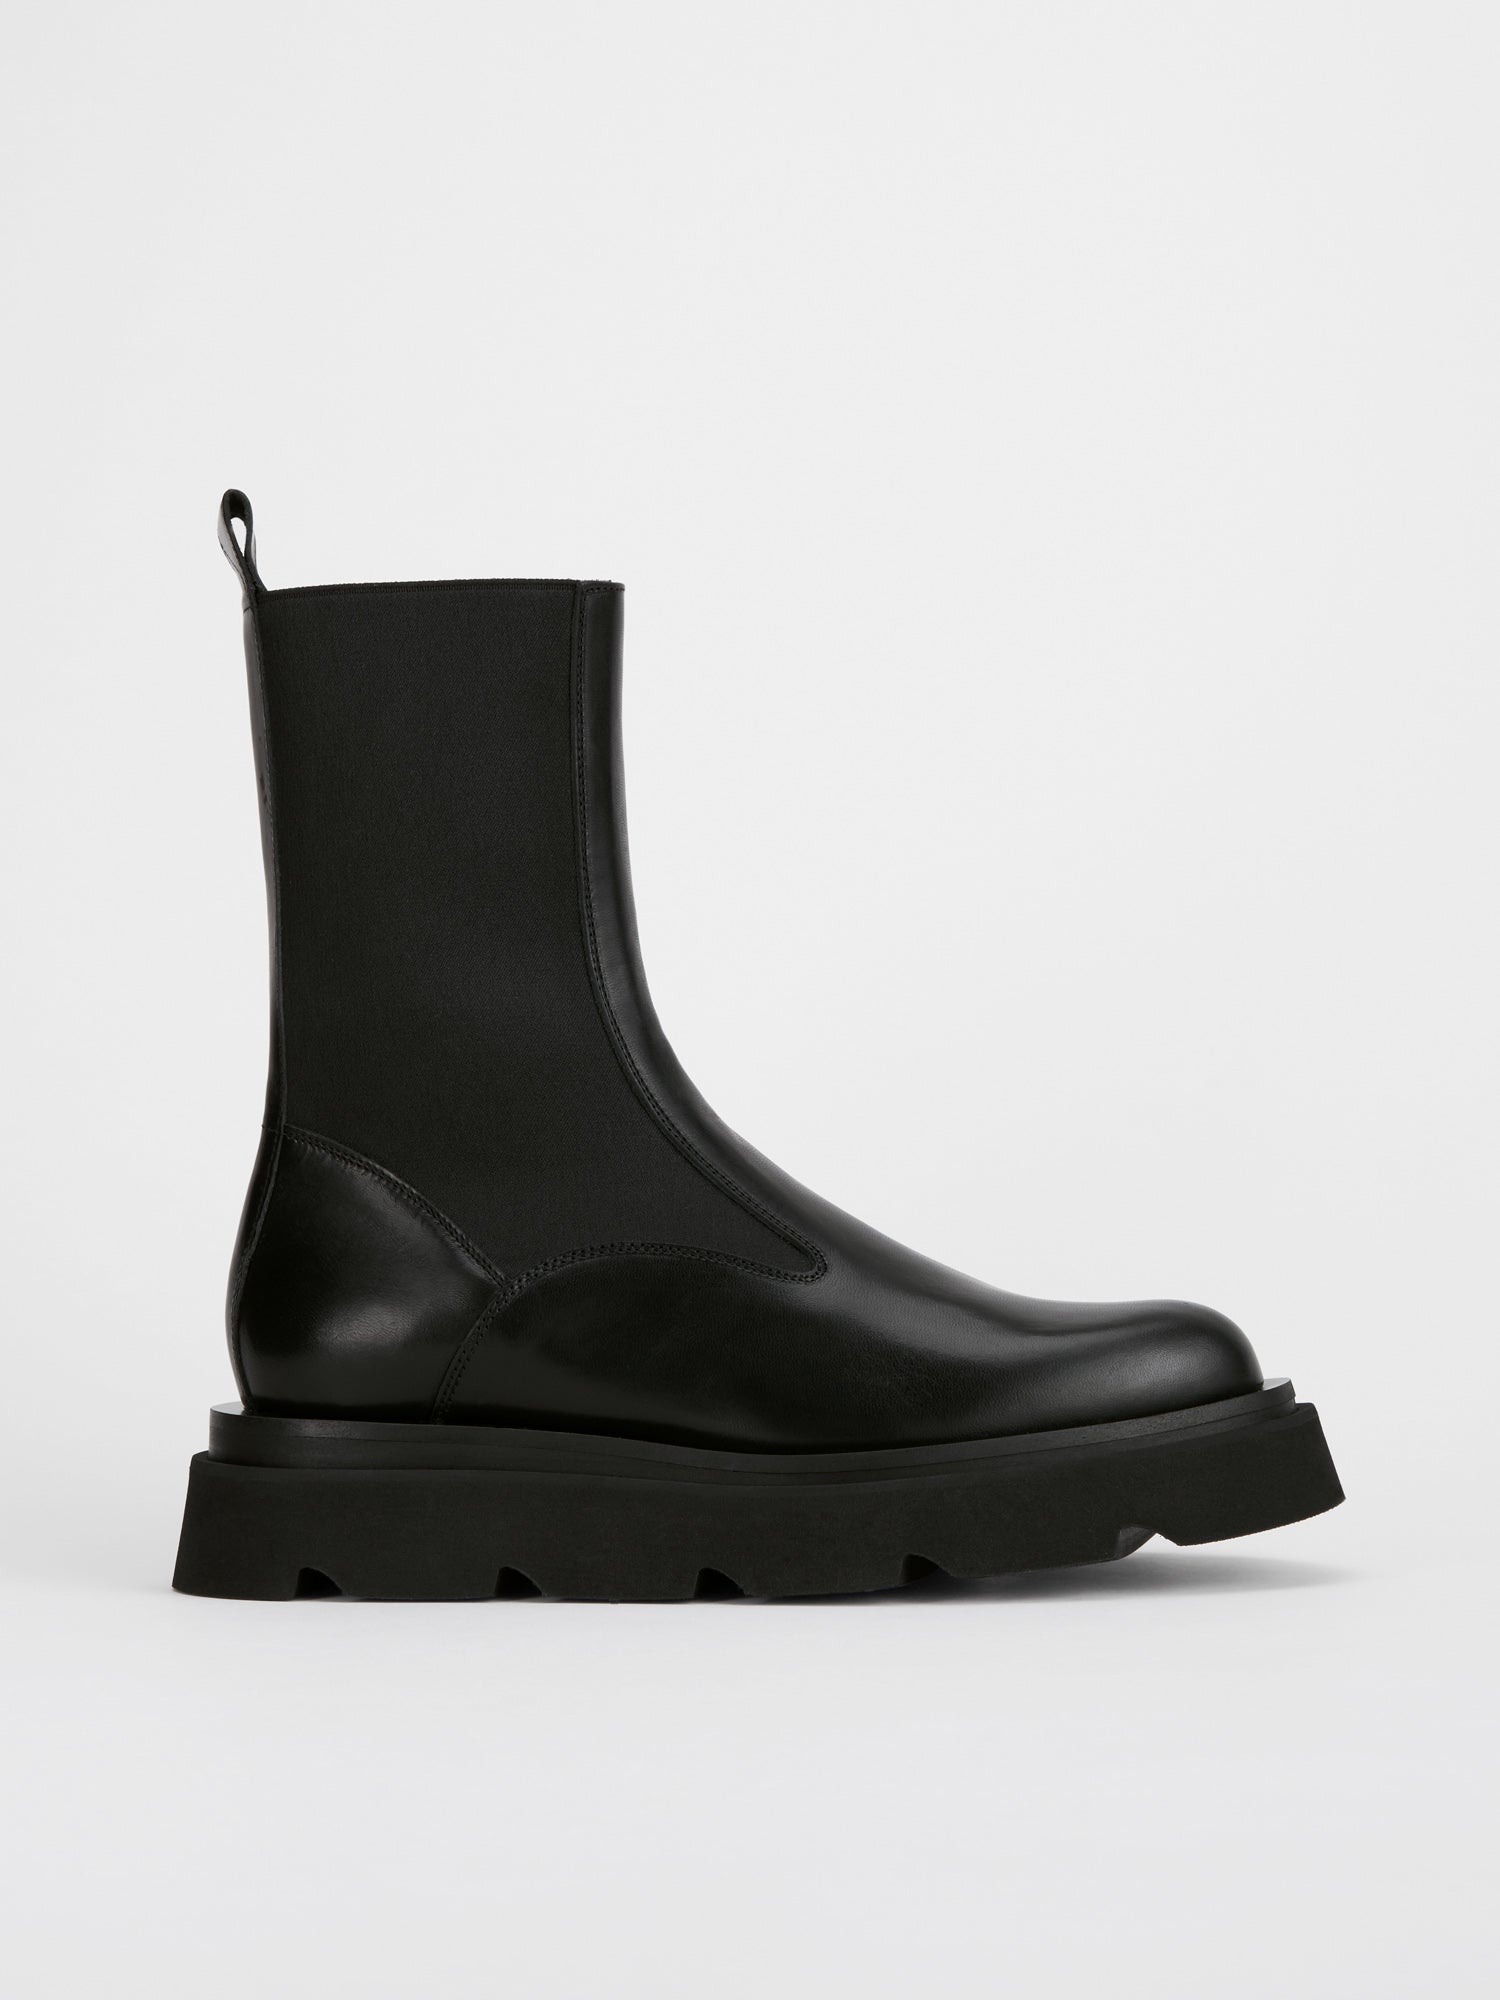 ATP Atelier Moncalieri Chunky Vacchetta Leather Boots in Black